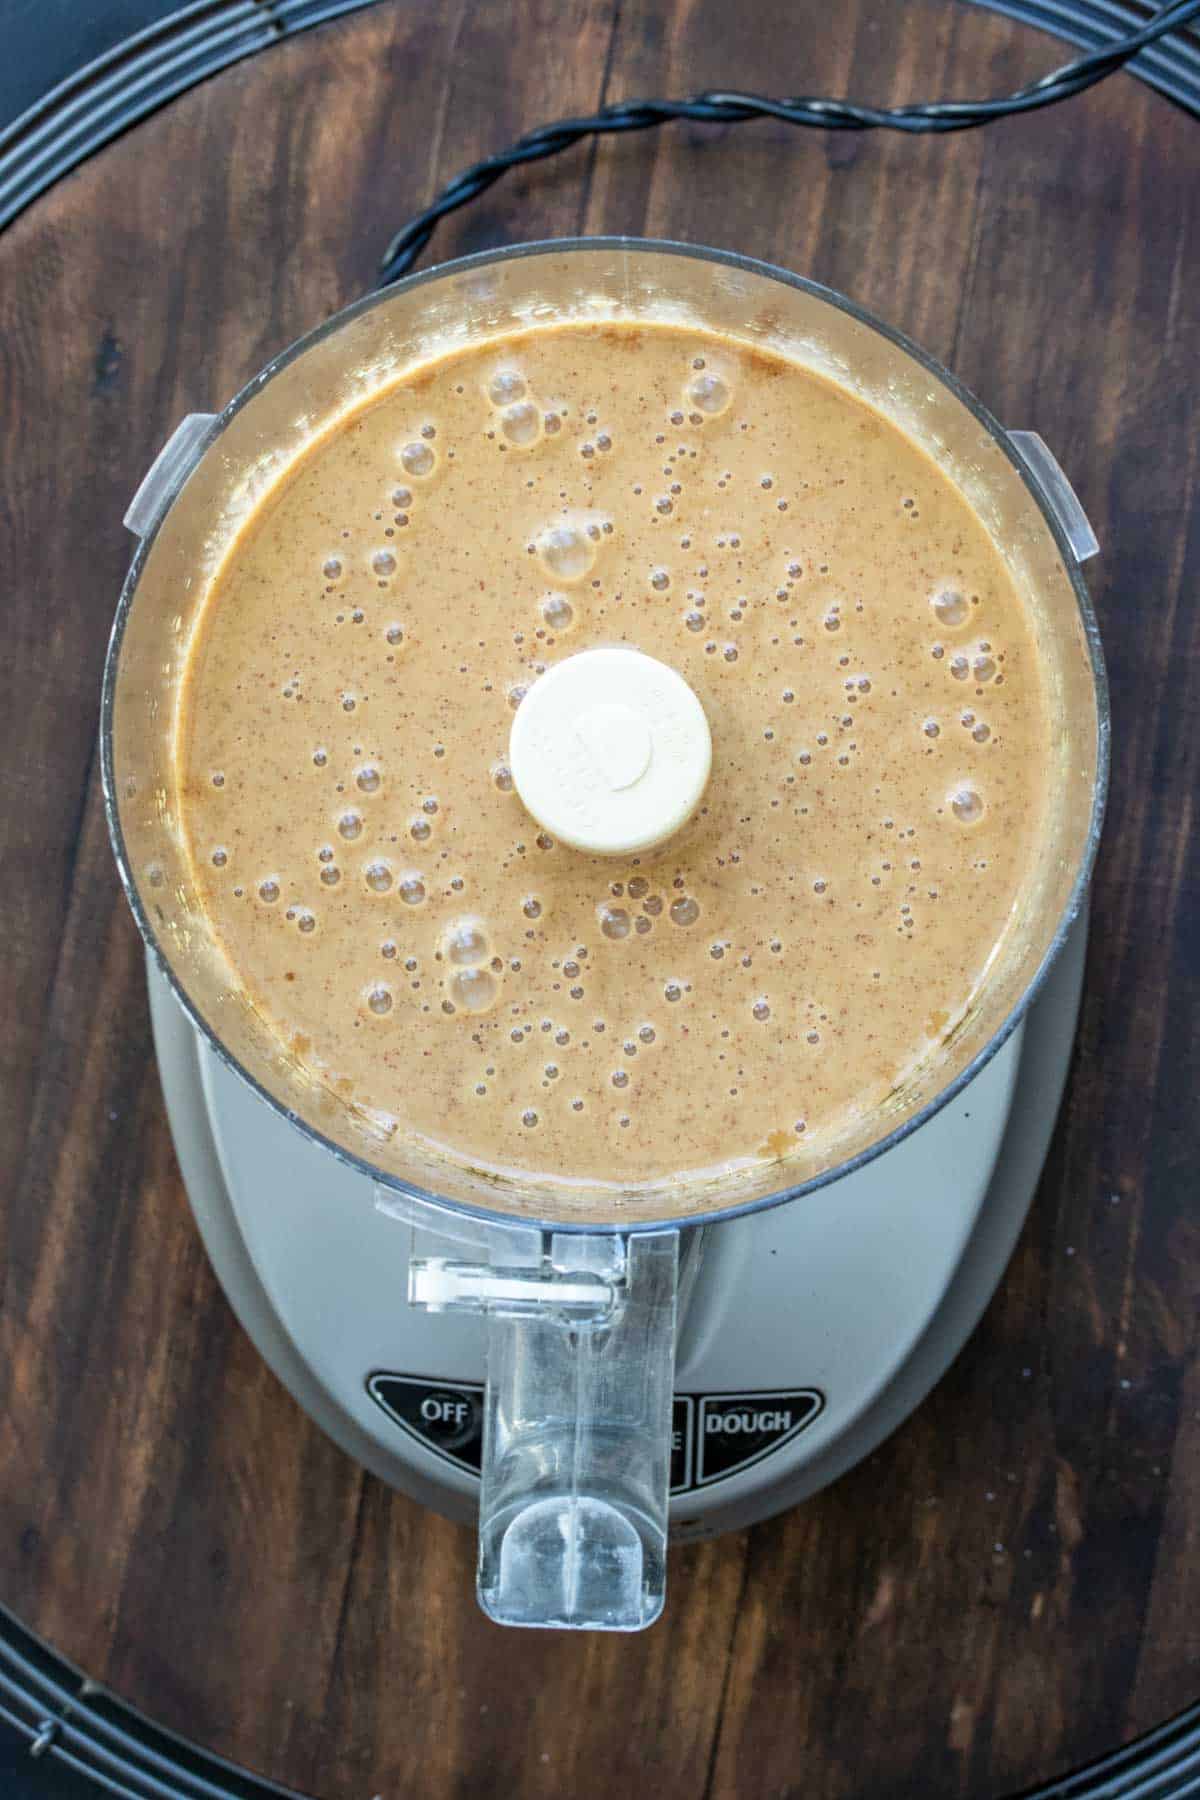 Top view of a food processor with a light brown mixture inside